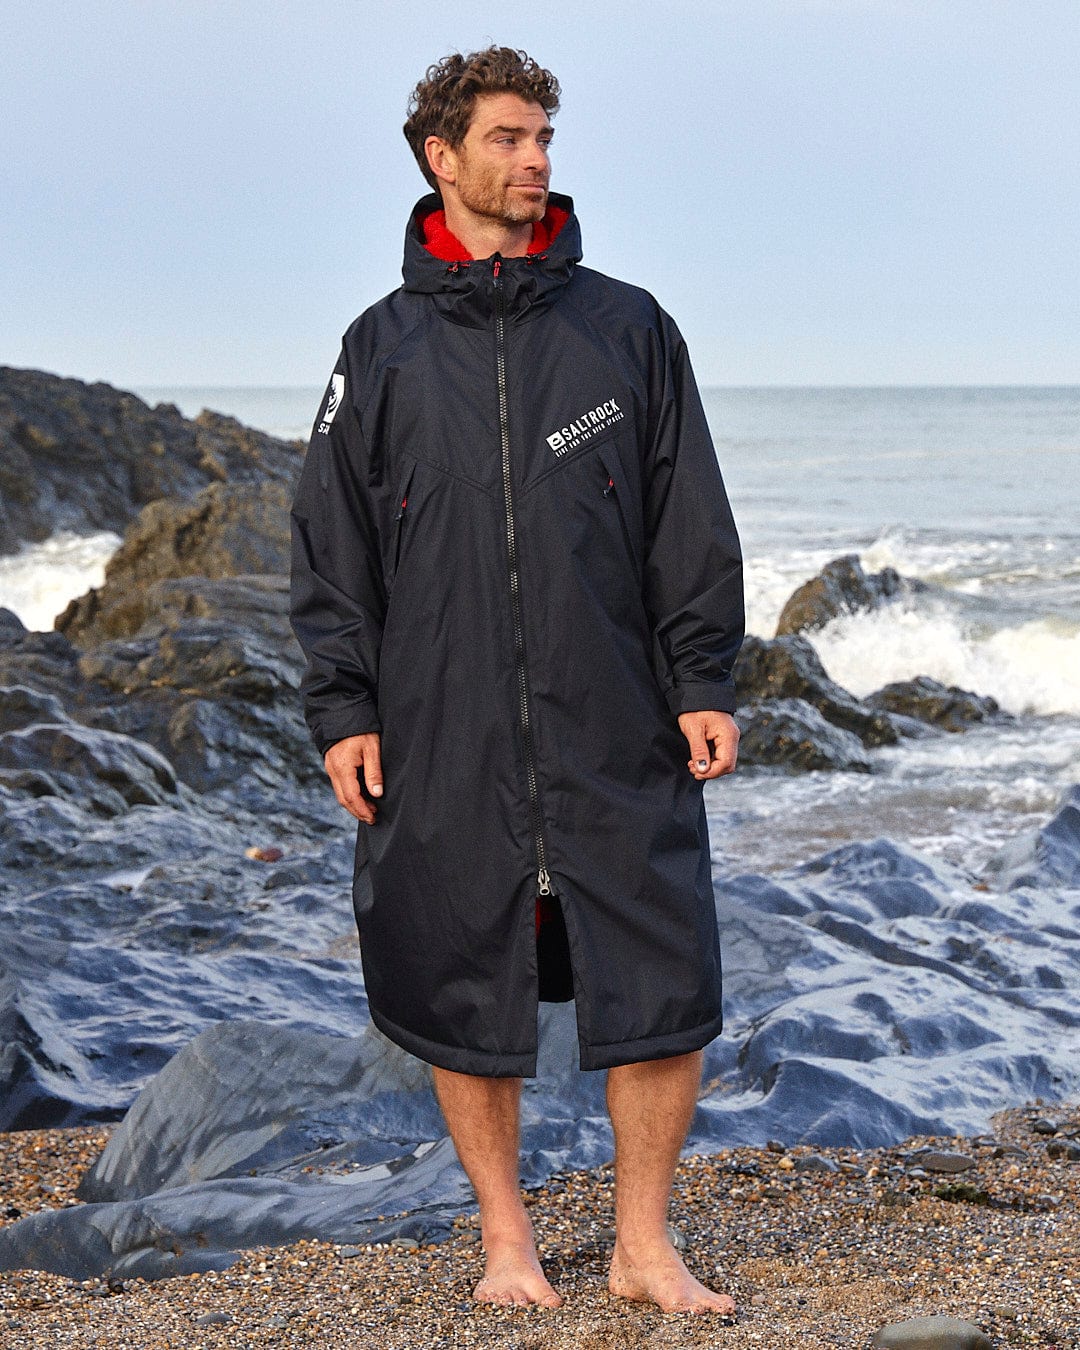 Man in a Saltrock Recycled Four Seasons Changing Robe - Black/Red standing barefoot on a rocky beach with waves crashing in the background.